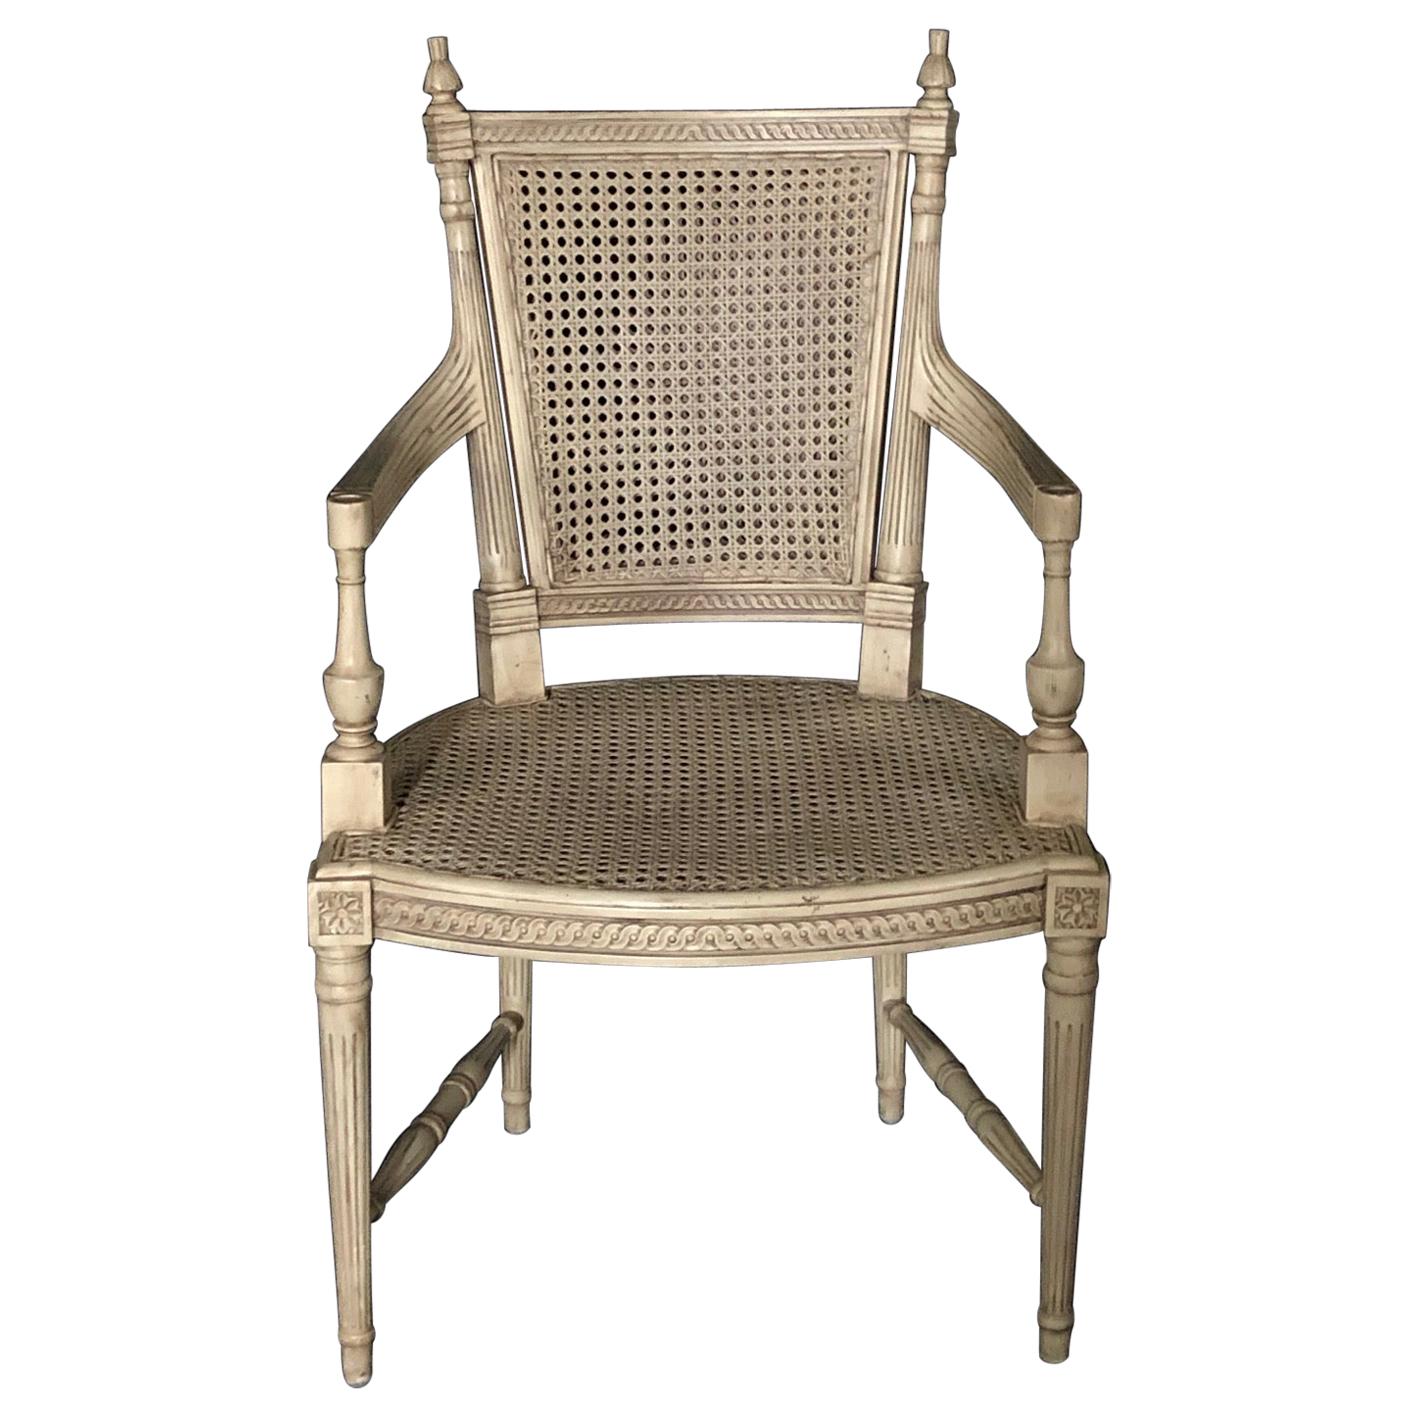 Classically Elegant French Louis XVI Style Painted Armchair with Double Caning